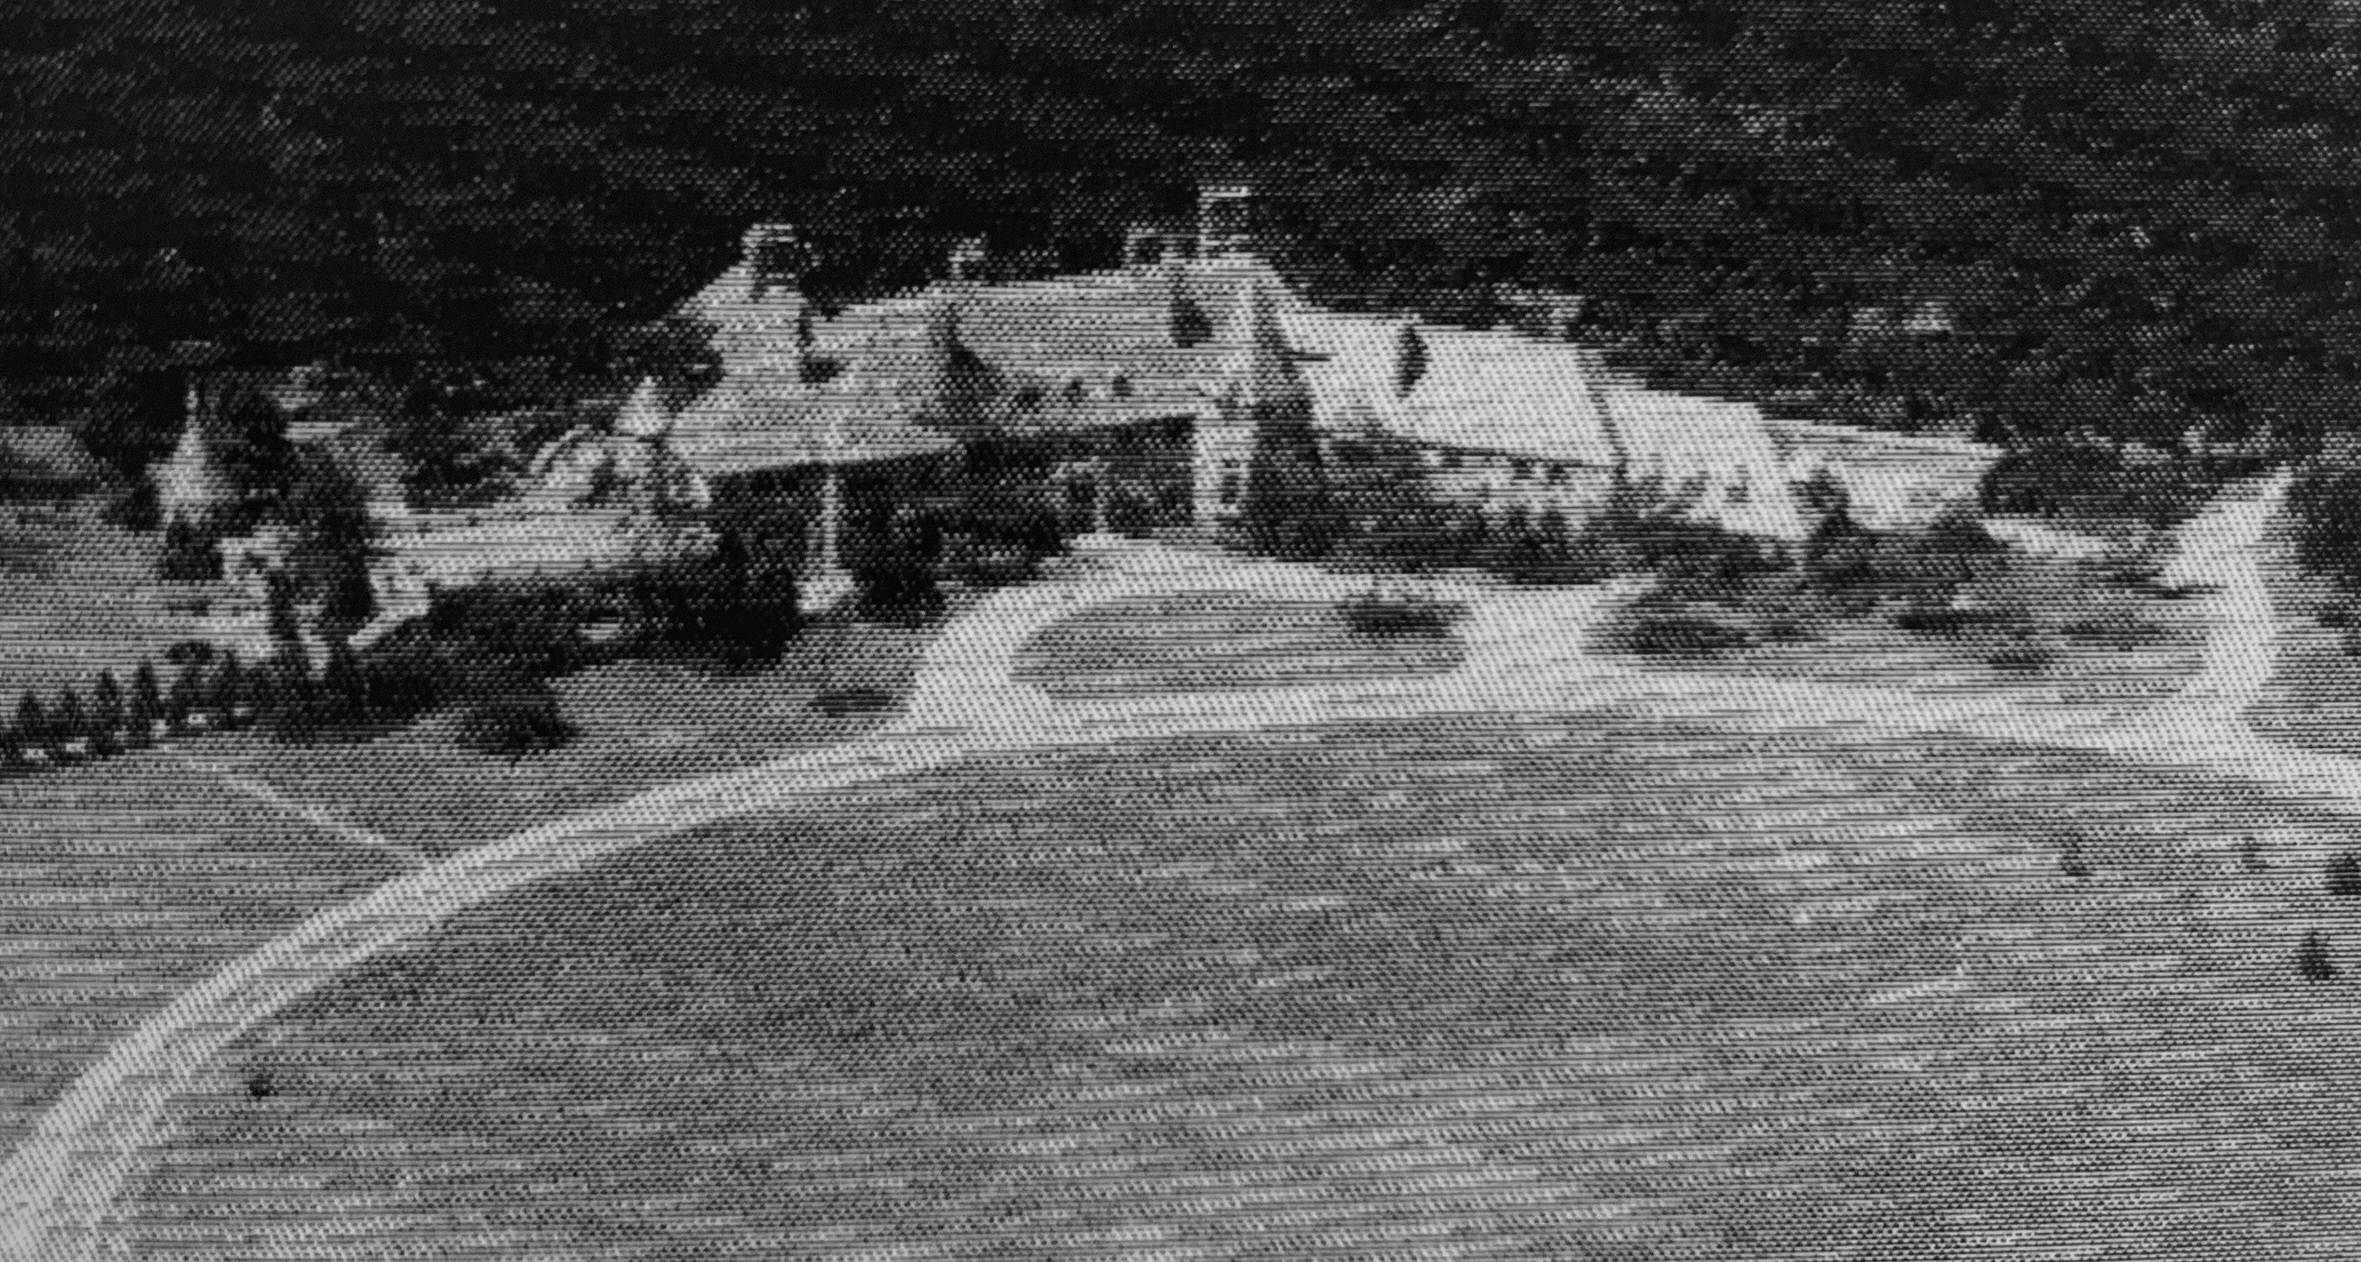 Historical Image of Exterior Circa 1932, The Graylyn Estate, 1932, Member of Historic Hotels of America, in Winston-Salem, North Carolina.